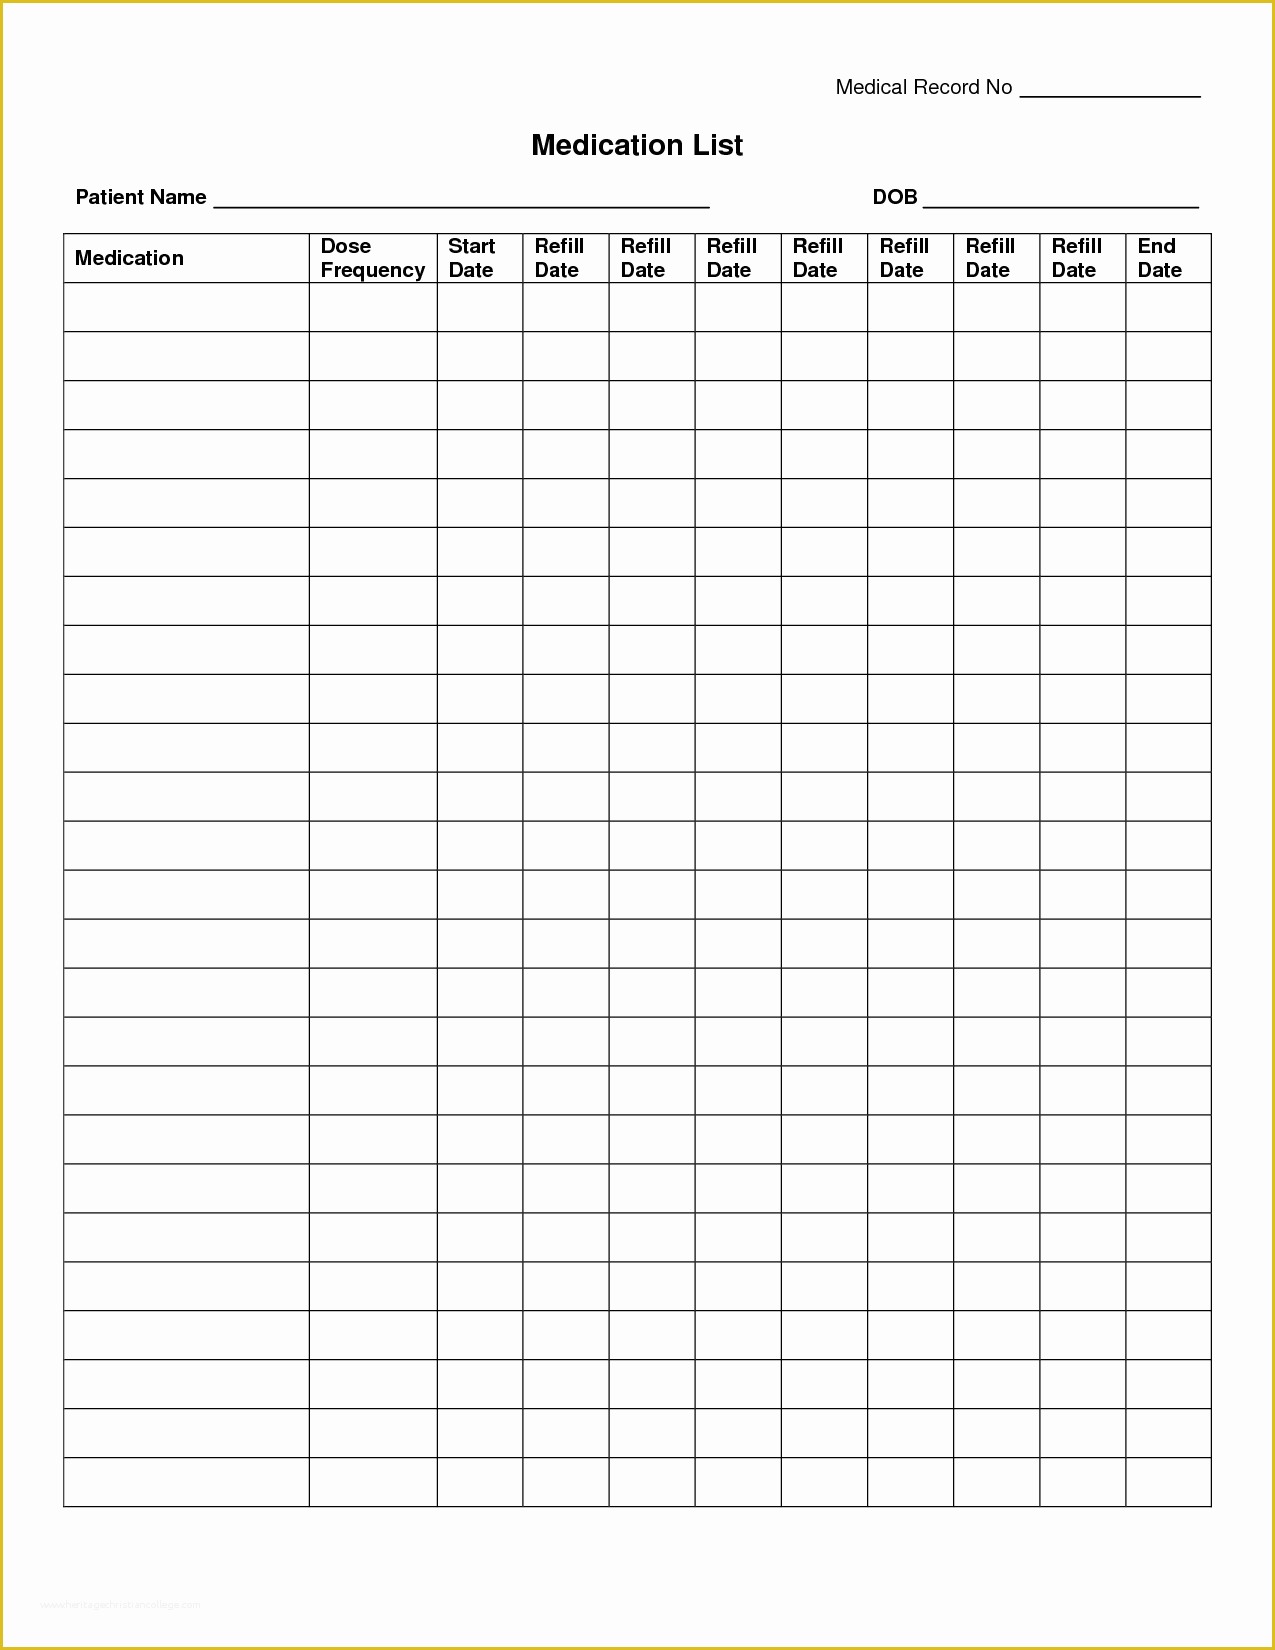 Medication Administration Record Template Free Of Free Medication Administration Record Template Excel